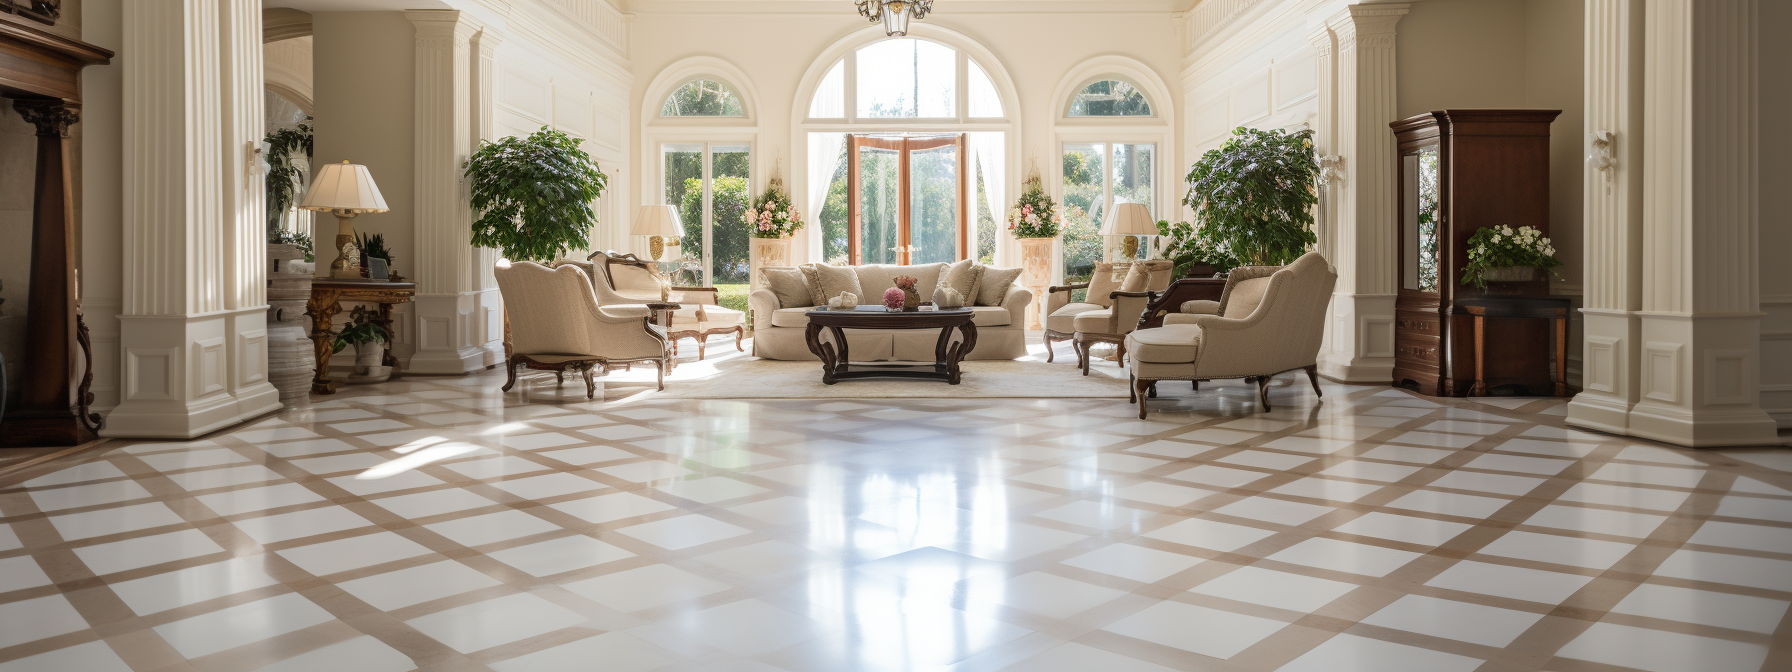 The Key to Beautiful Floors - Regular Tile and Grout Cleaning